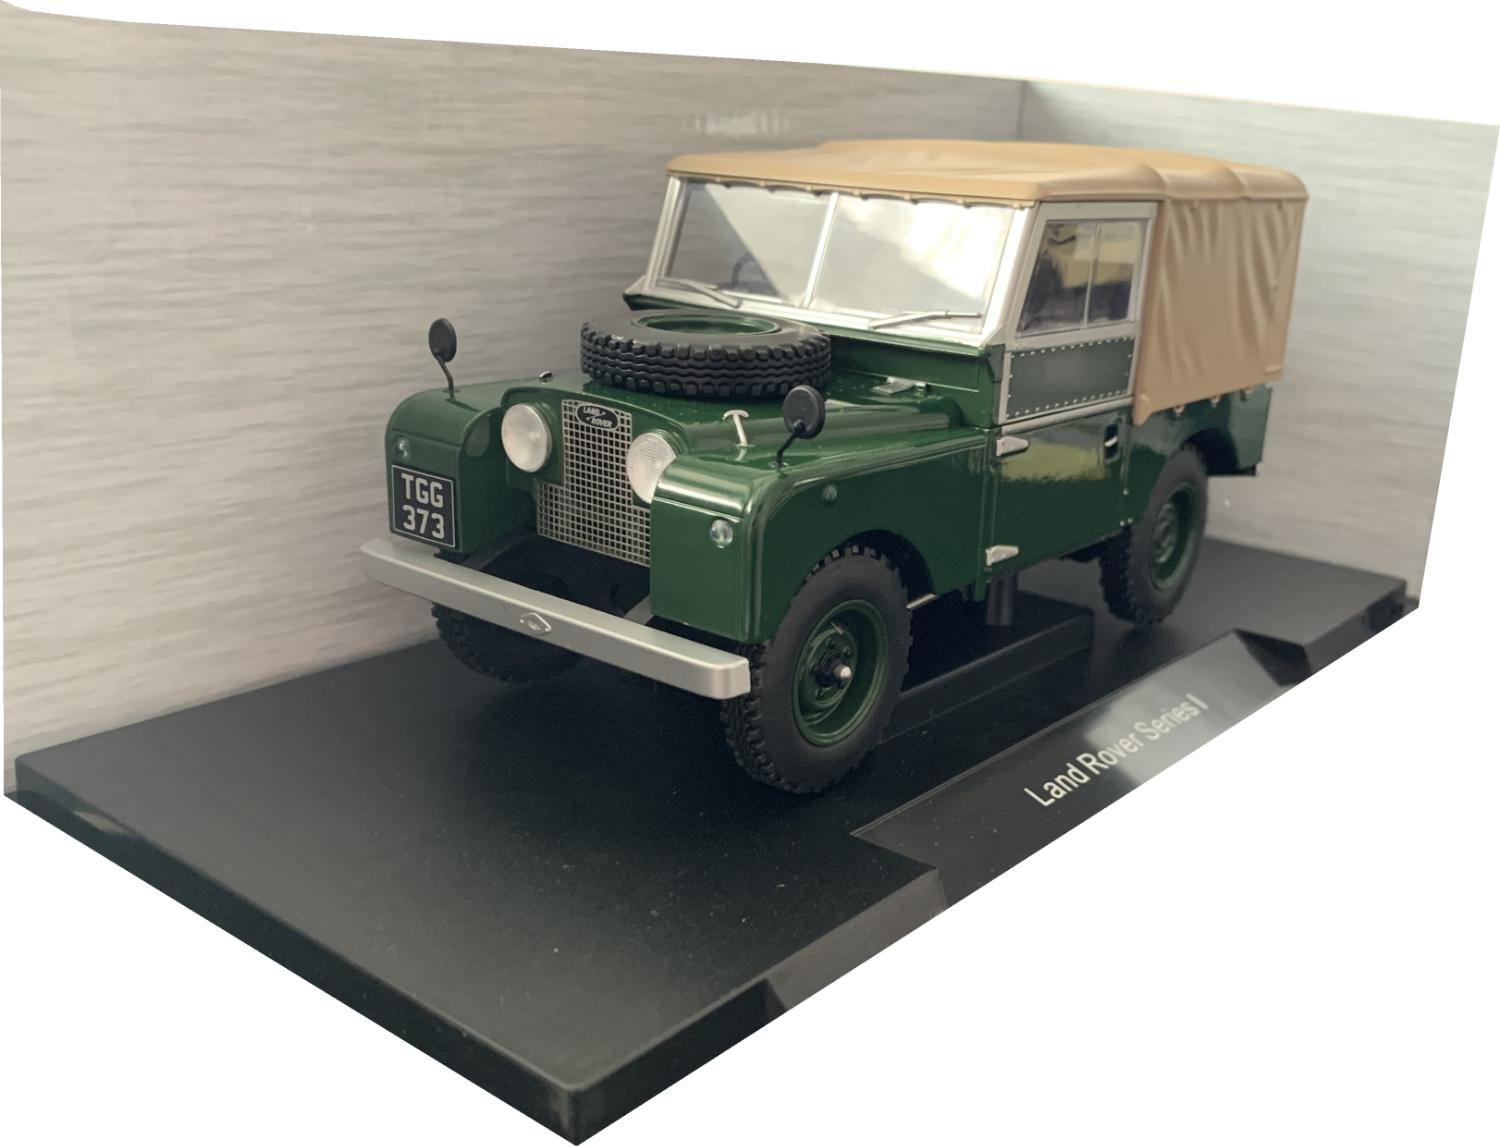 1:18 scale diecast  models of Land Rovers